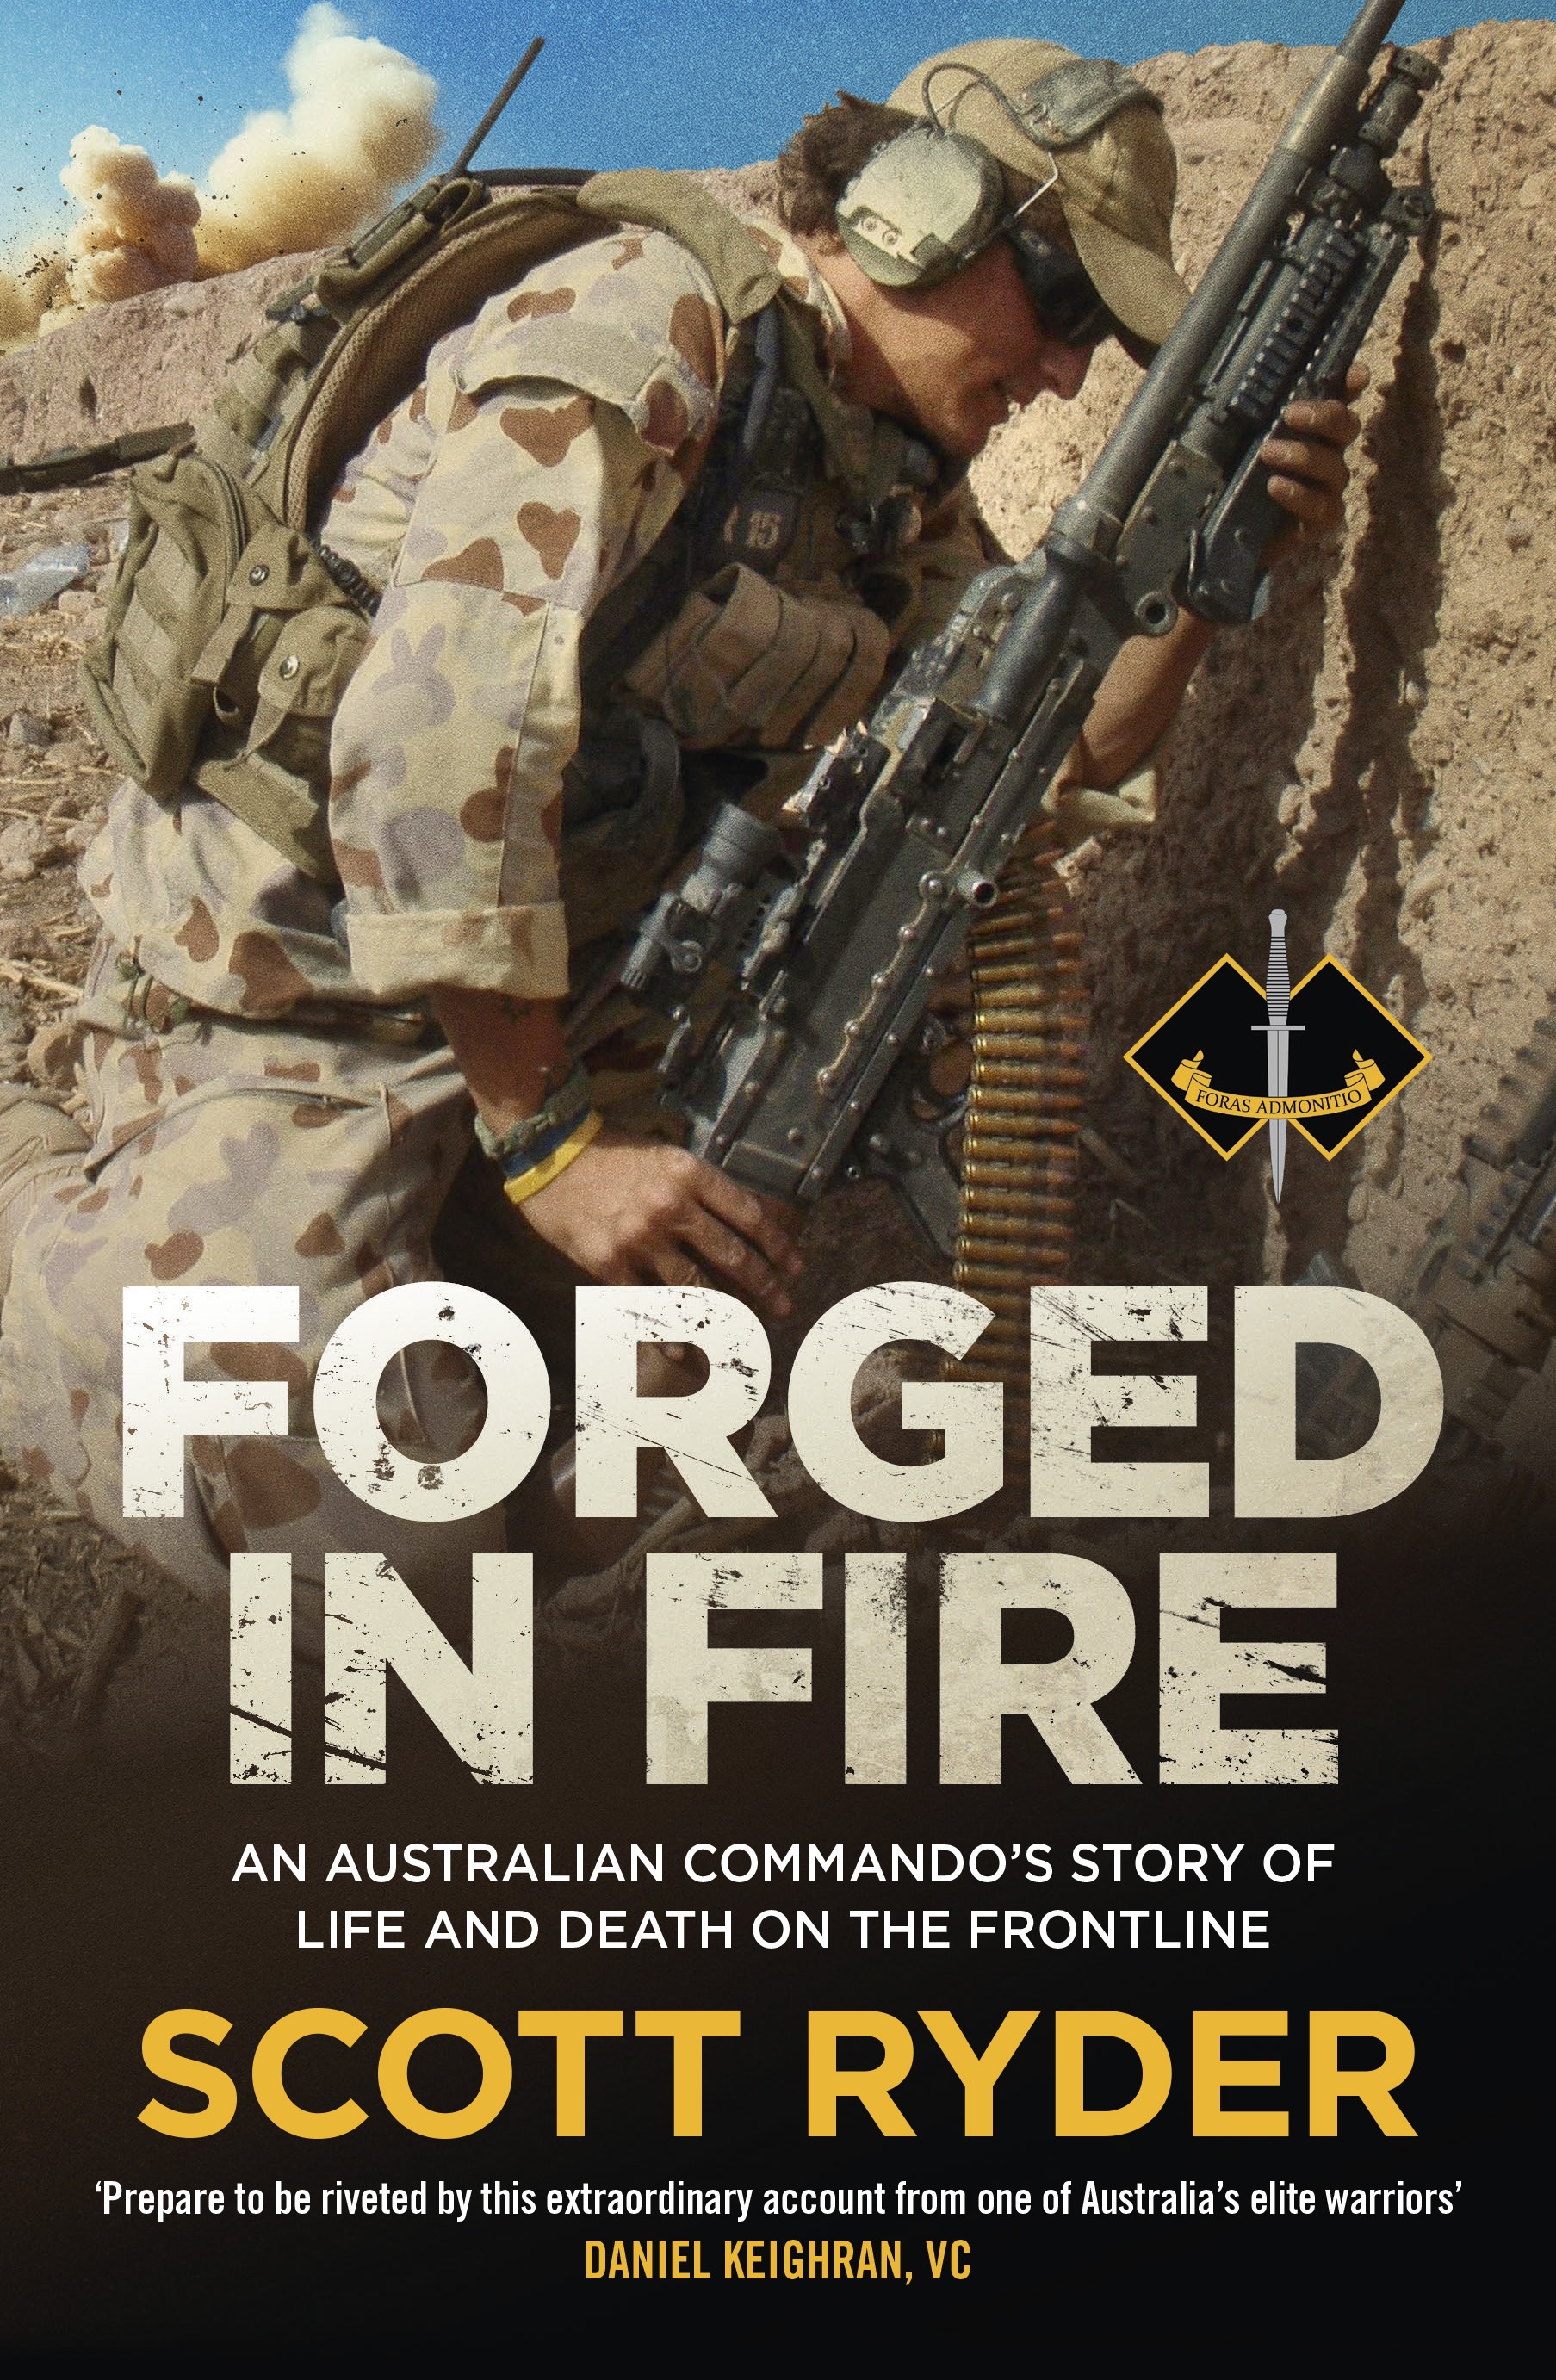 Forged in Fire by Scott Ryder. A military man wearing camouflage clothes and holding a large gun hiding in a mound.